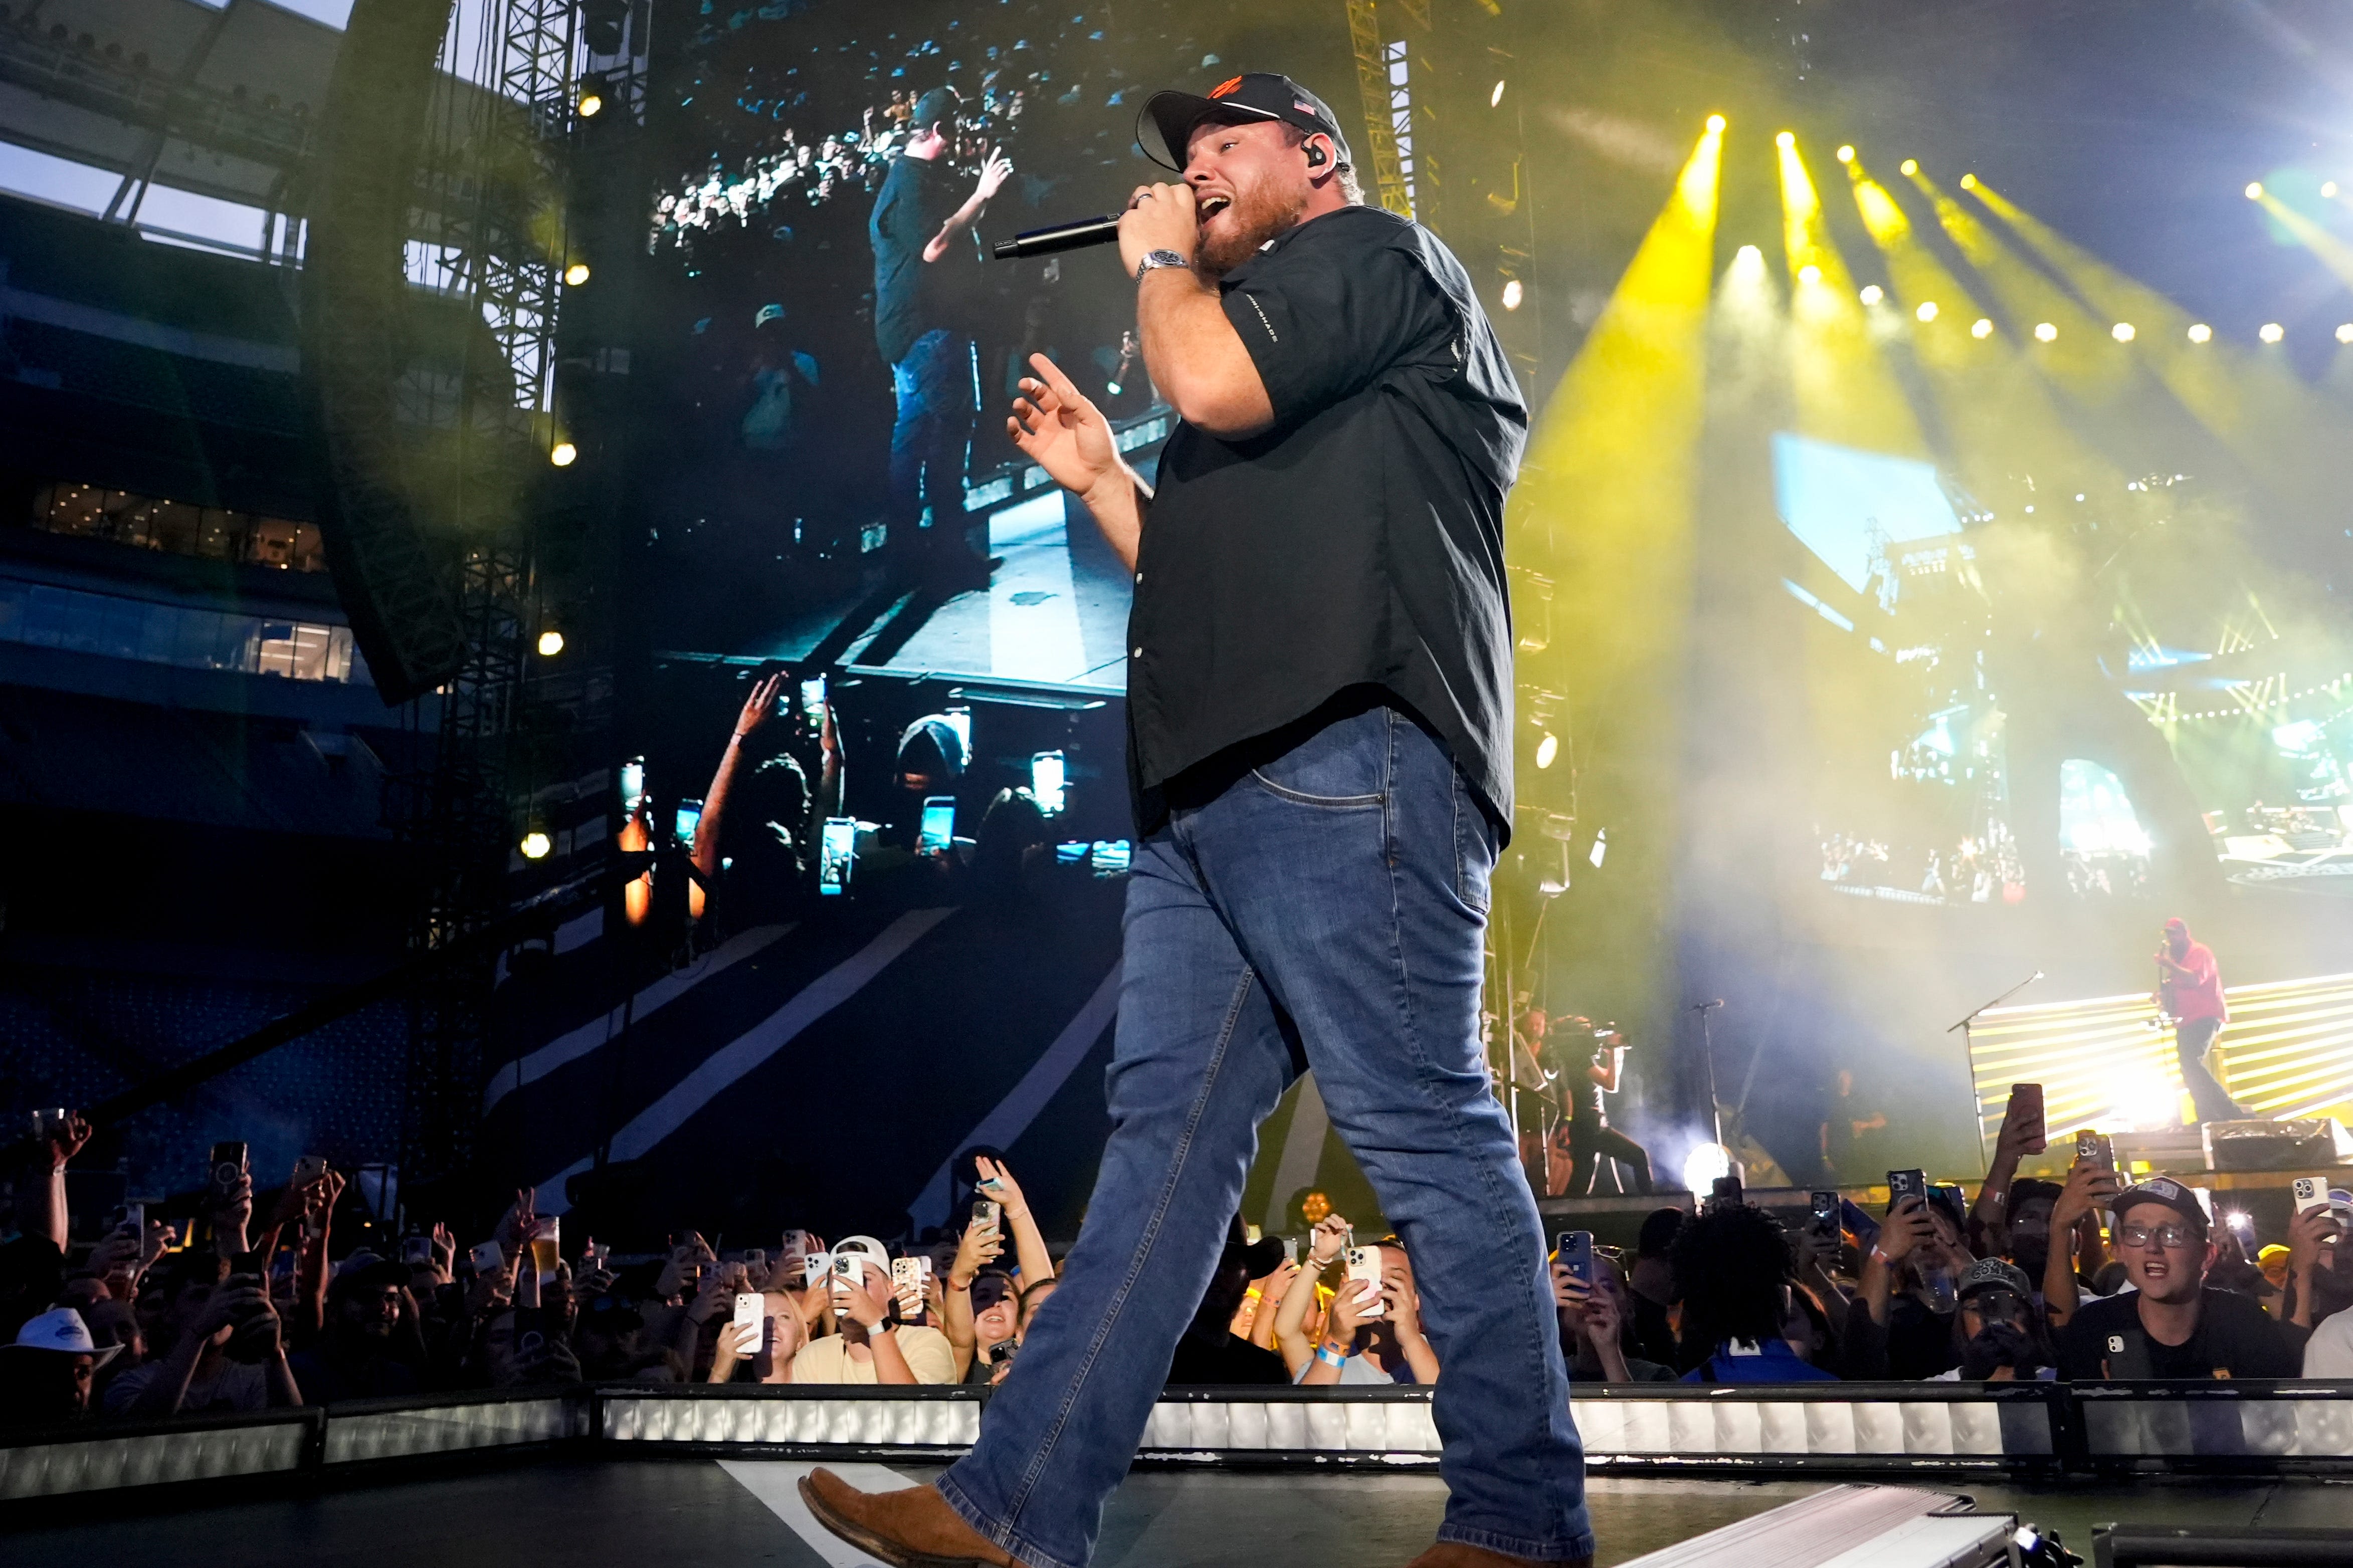 Luke Combs in Cincinnati: Our 6 favorite moments from his 2 massive shows